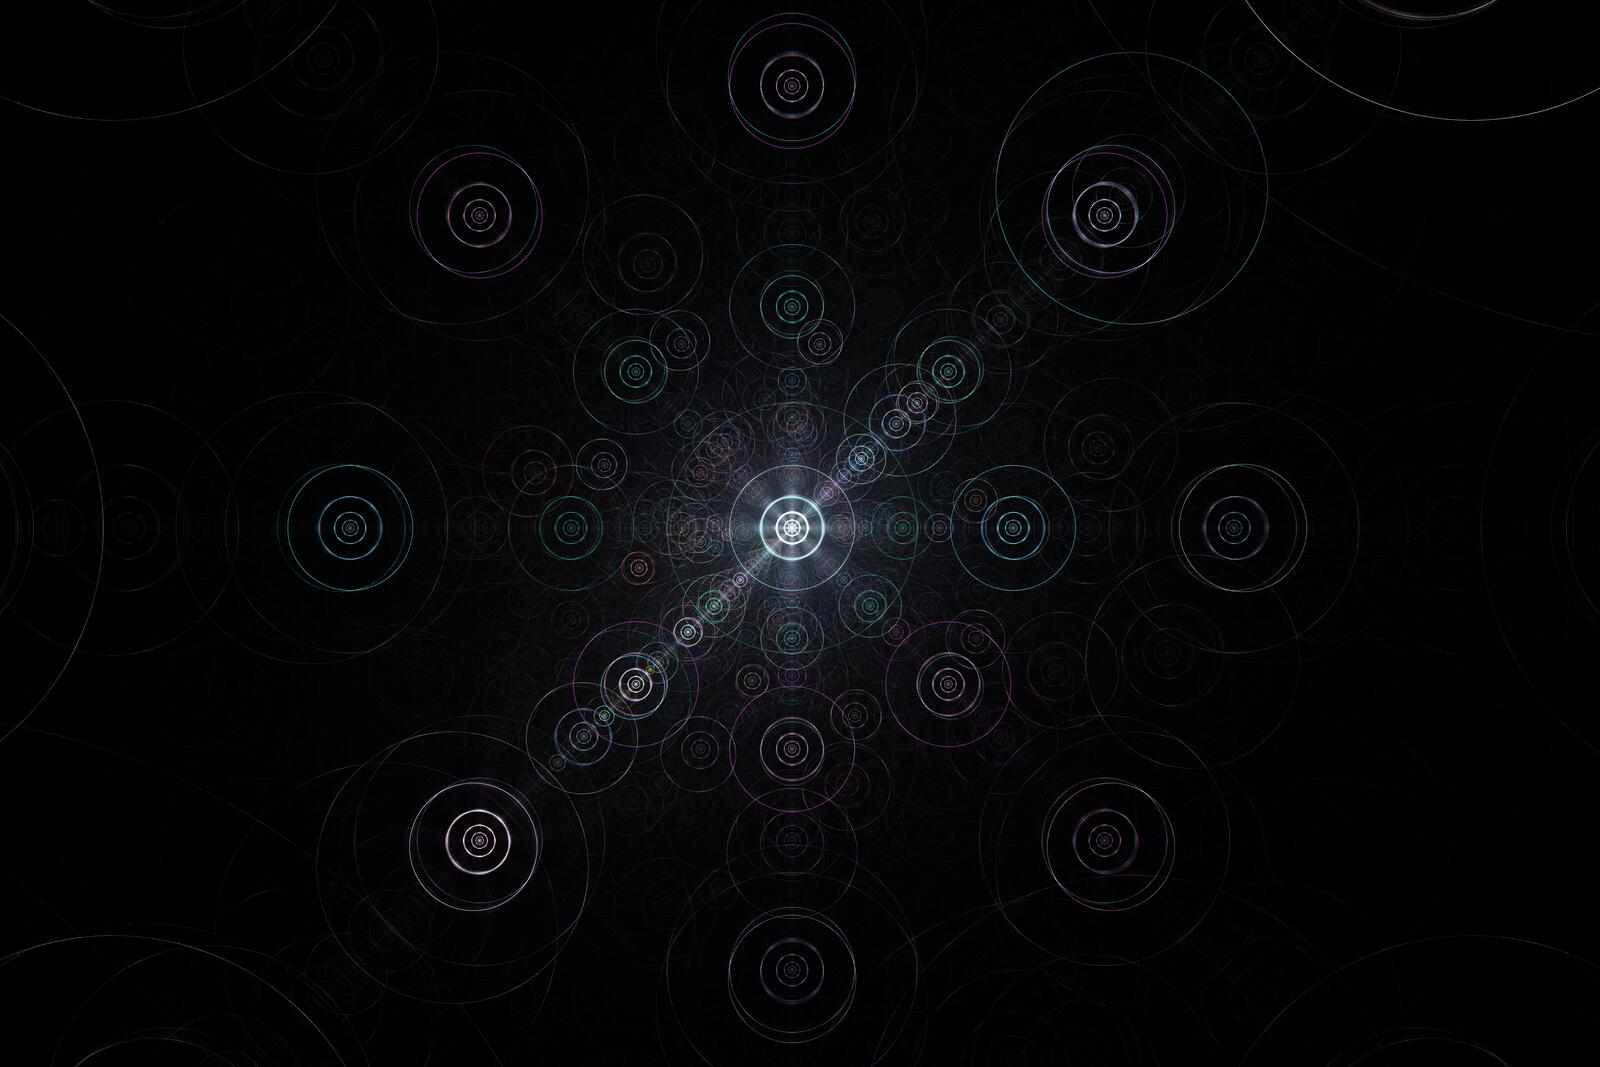 Wallpapers connections infinity wallpaper nested circles on the desktop